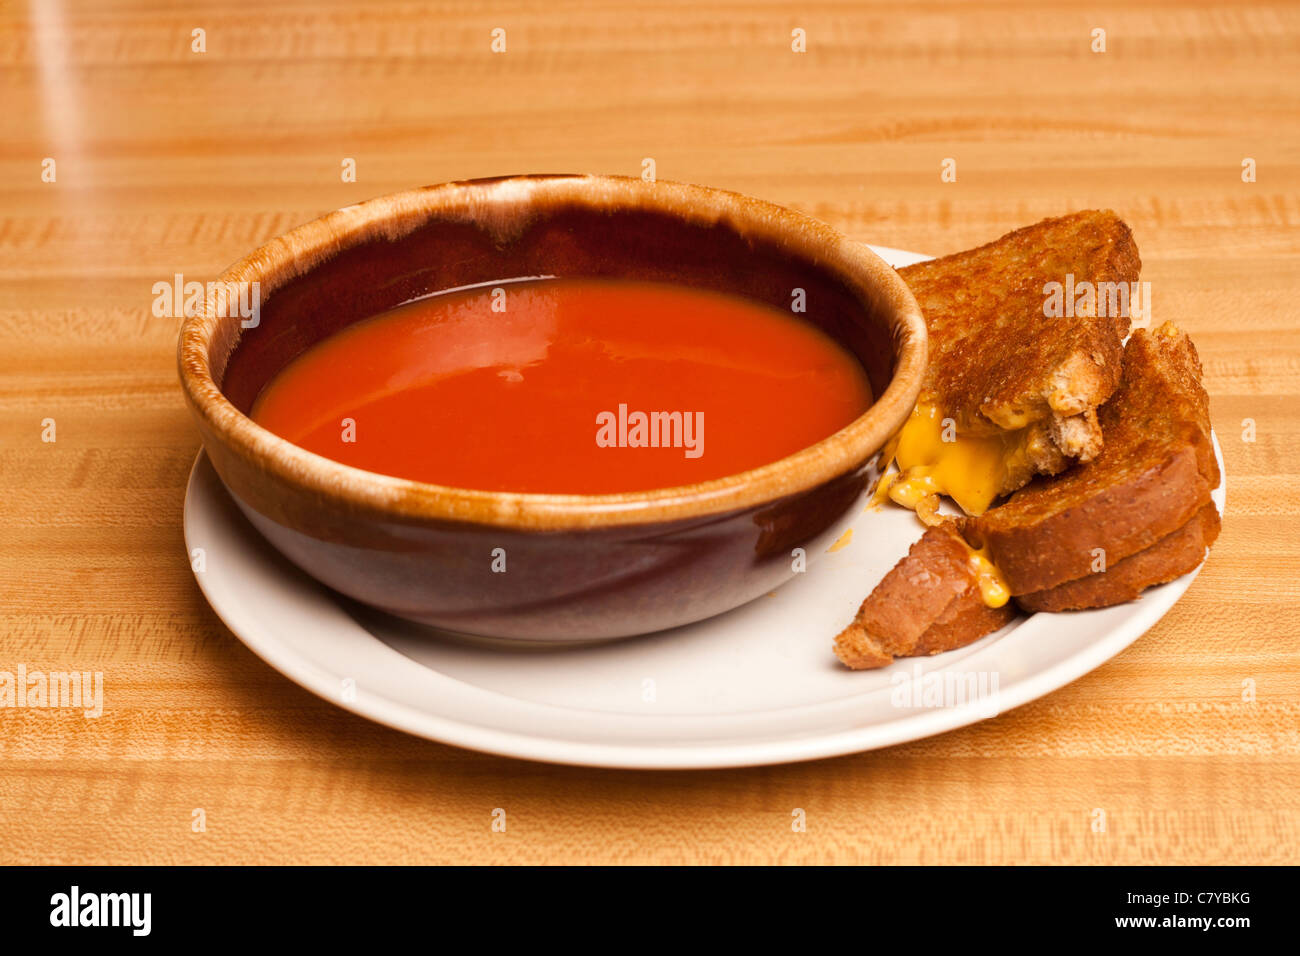 Tomato soup sharing a plate with a cut grilled cheese sandwich Stock Photo